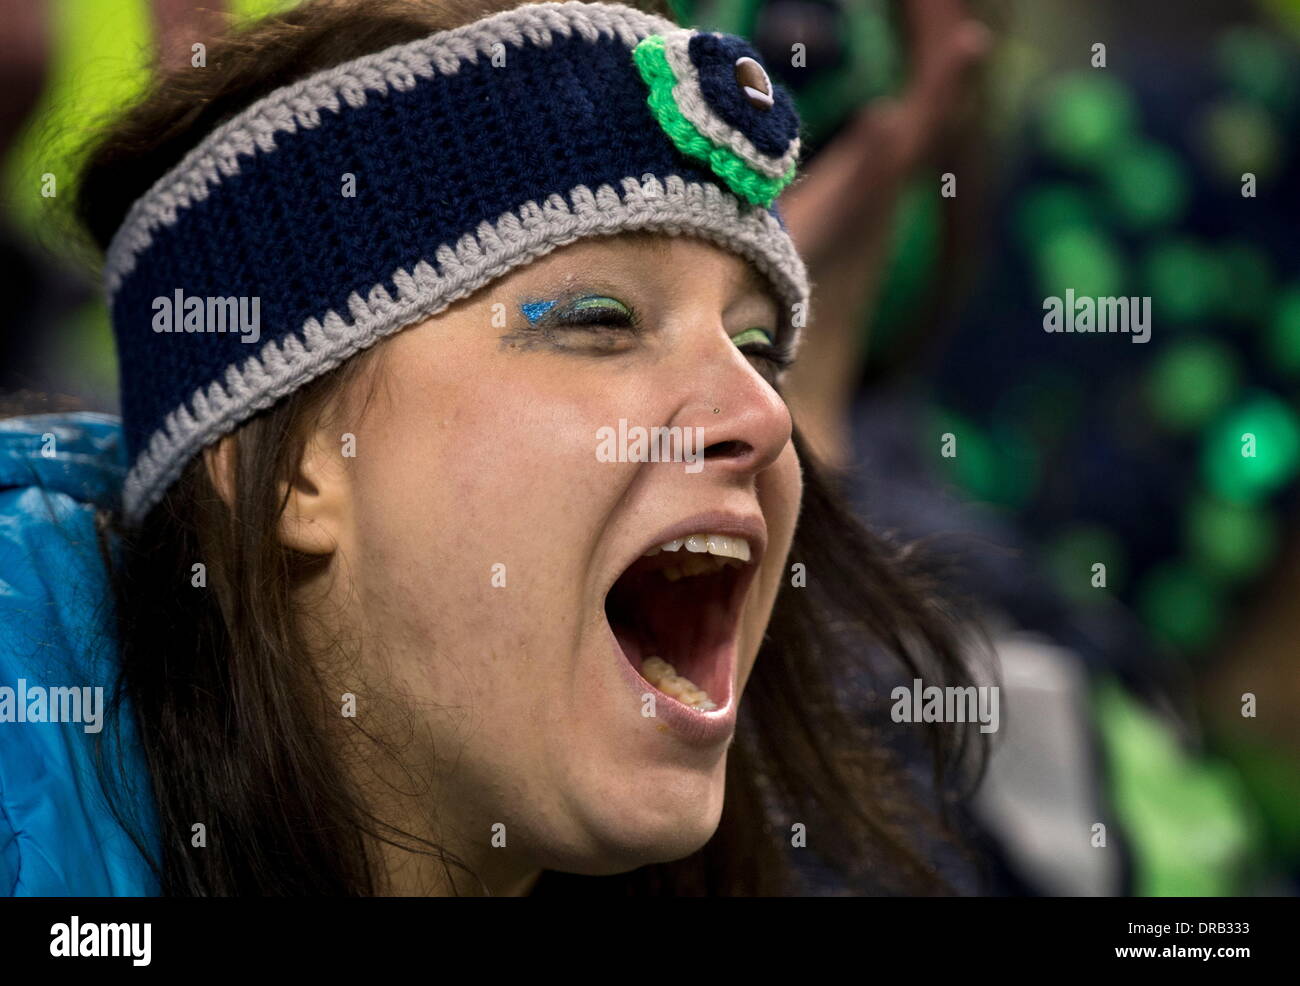 Seattle, WASH, USA. 19th Jan, 2014. Desirae McCaulley of Everett washington cheers on her team during the NFC championship game between the San Francisco 49ers and the Seattle Seahawks at CenturyLink Field in Seattle, Wash. on Sunday, Jan. 19, 2014. © Hector Amezcua/Sacramento Bee/ZUMAPRESS.com/Alamy Live News Stock Photo